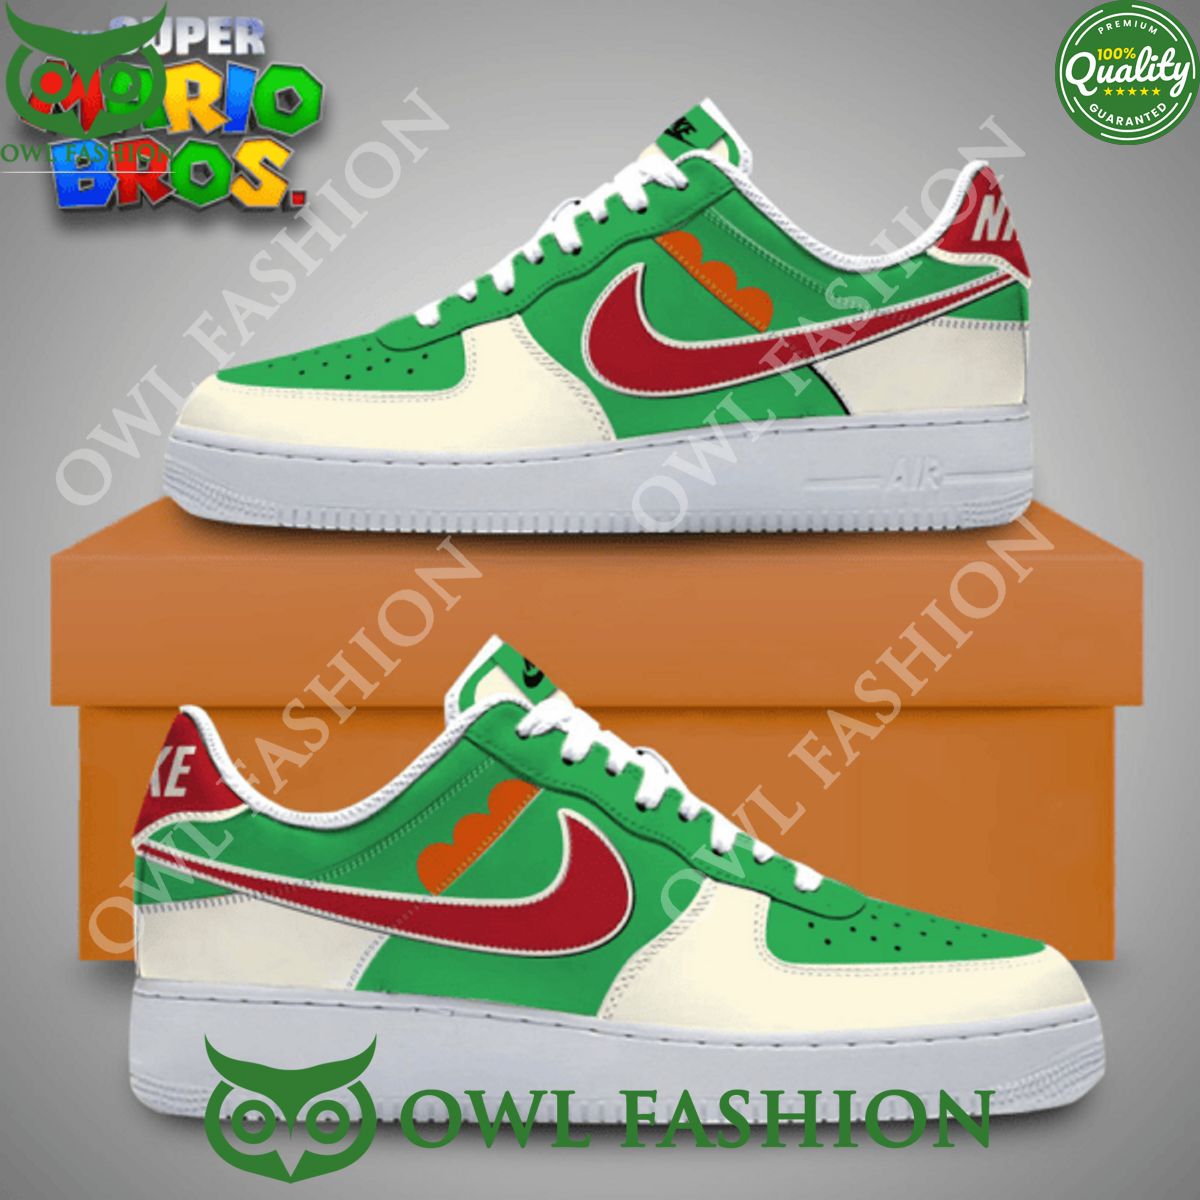 The Super Mario Bros Nike Green Air Force 1 Shoes